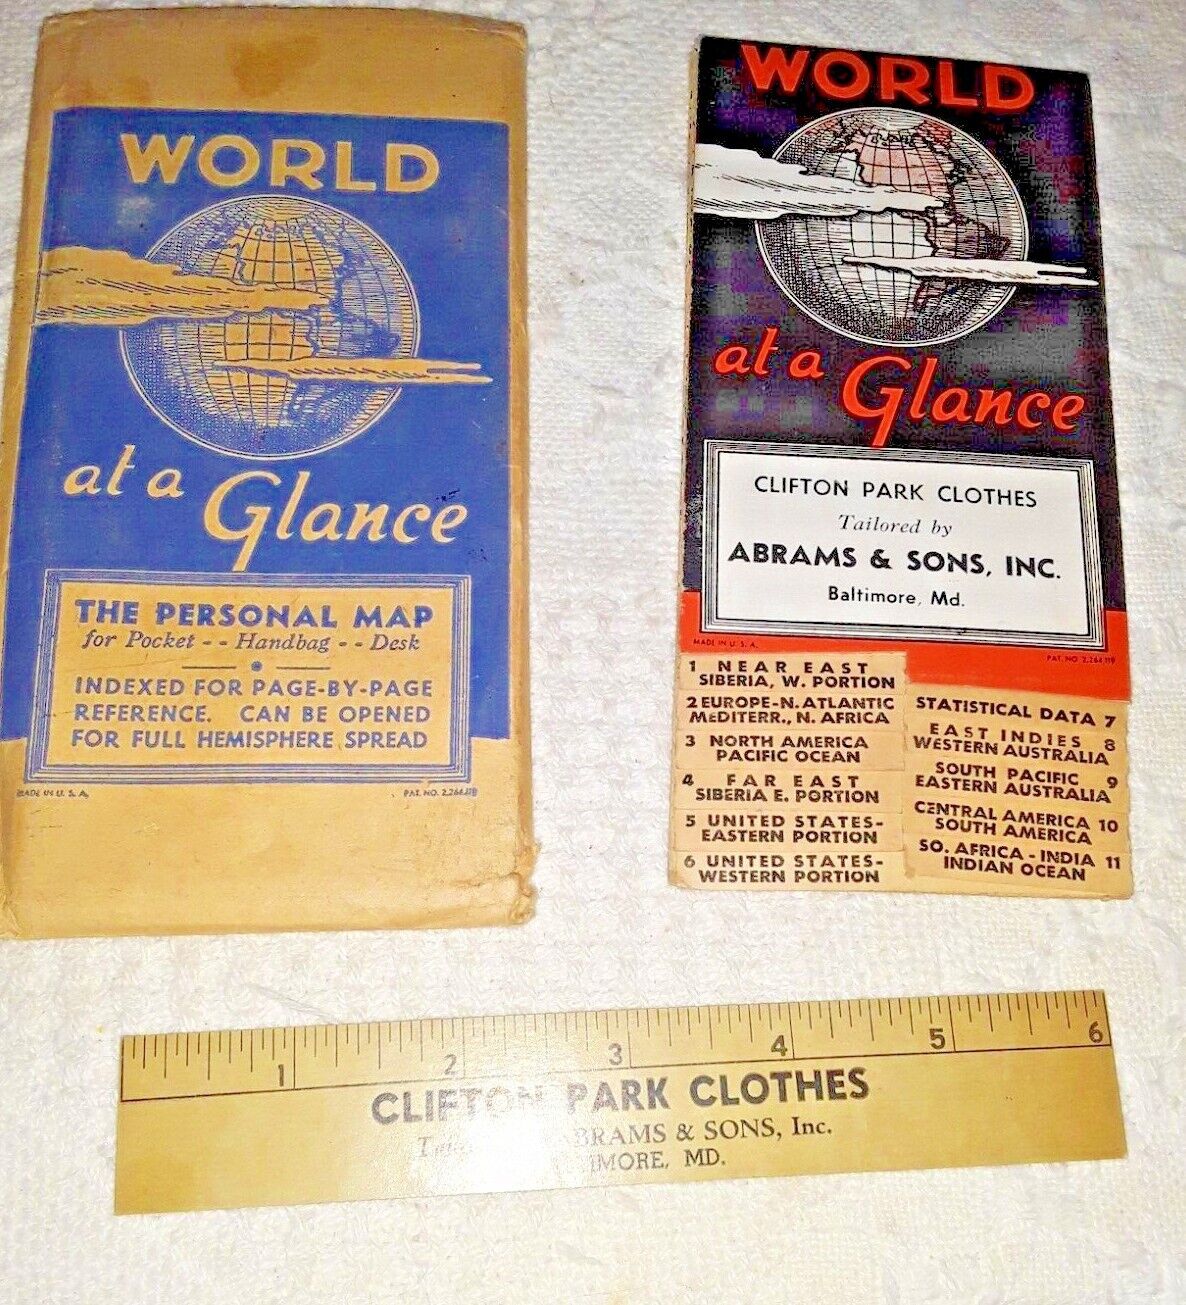 Vintage World at a Glance The Personal Map Glance N/S Full Hemisphere Spread VGC